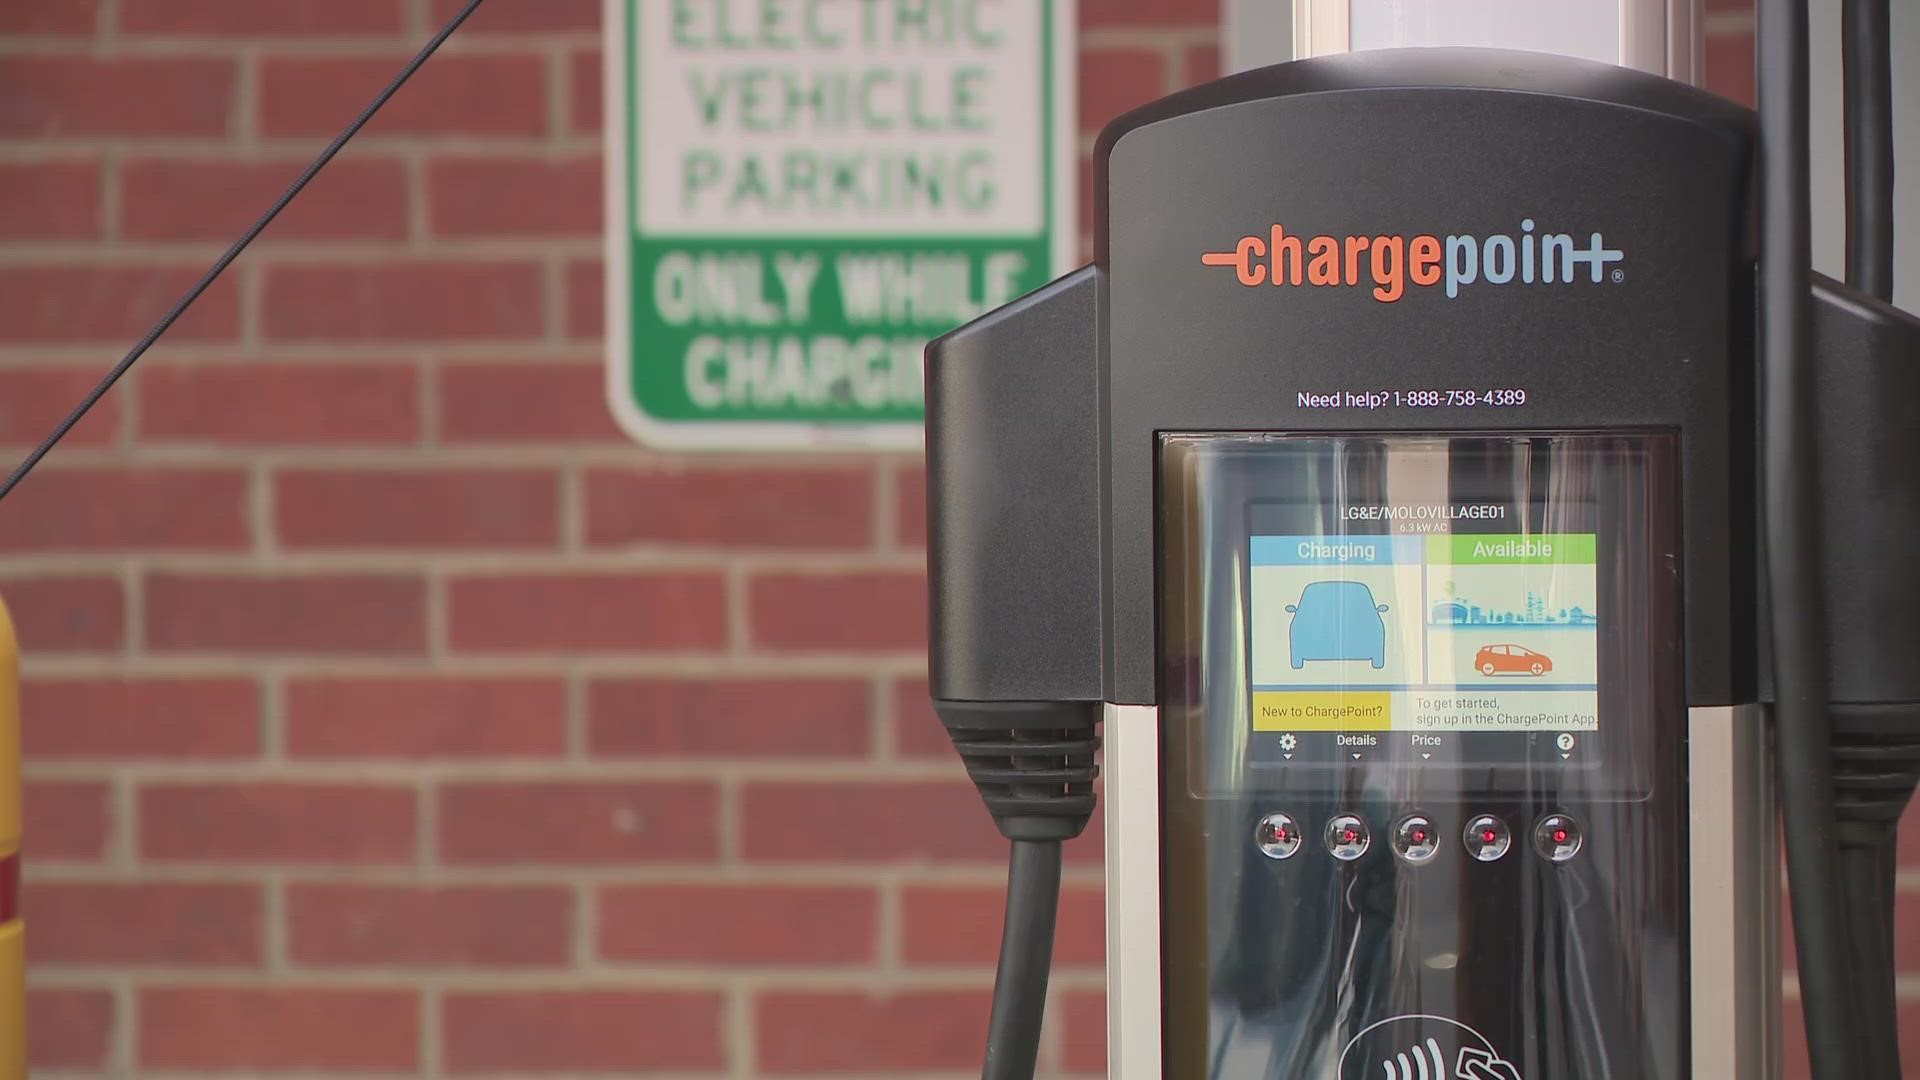 MOLO Village is the first non-profit to install a charging station through LG&E's program.